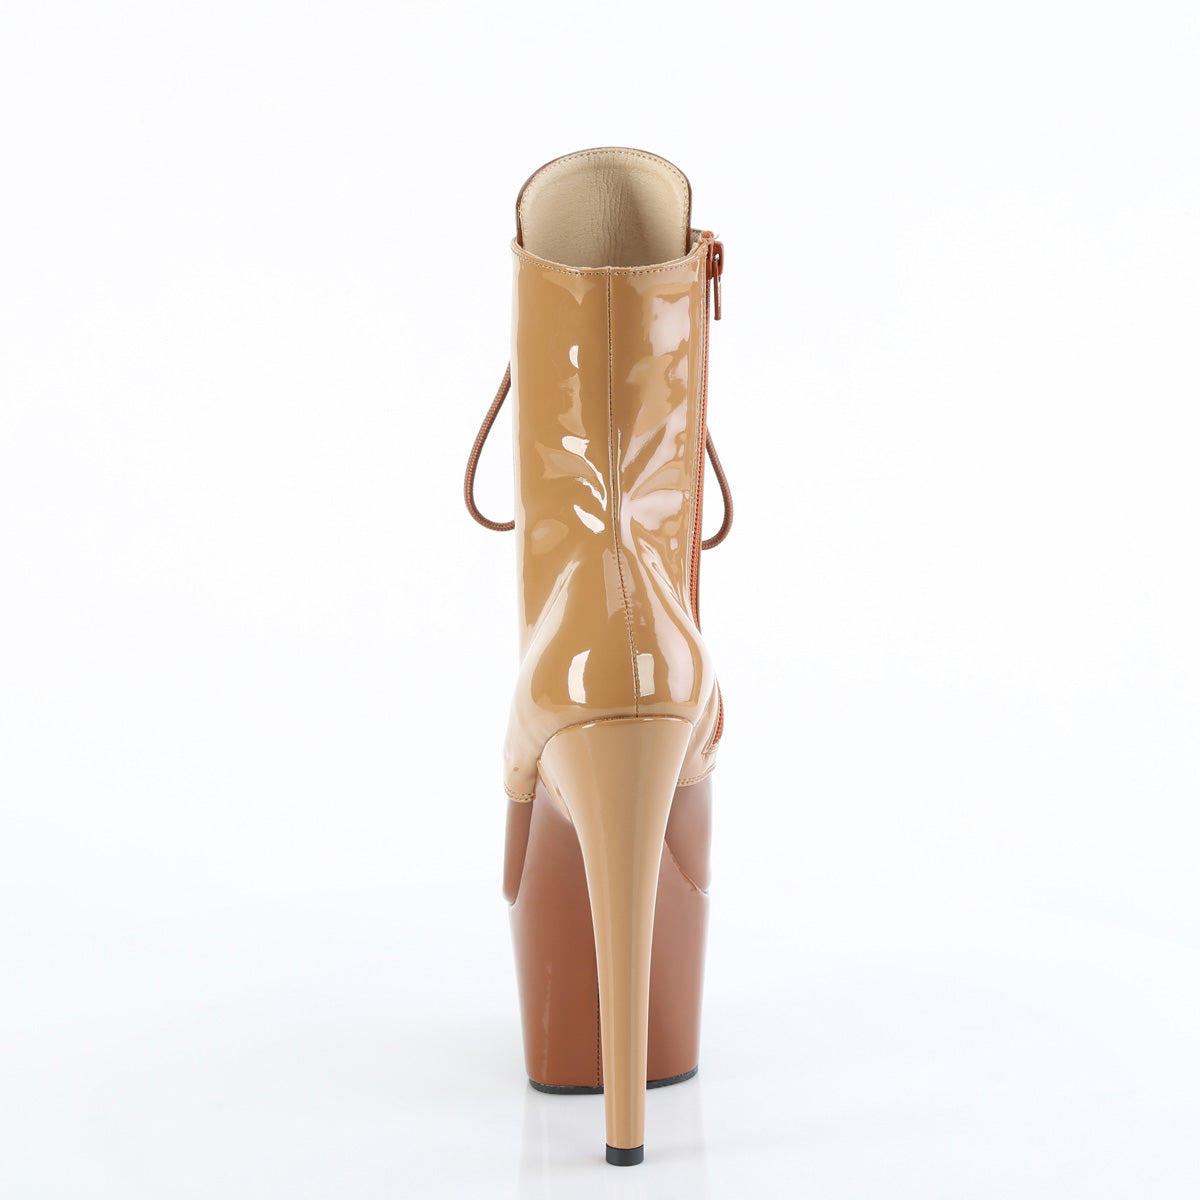 Pin-Up Style Pole Boots Toffee/Caramel Adore-1020DC